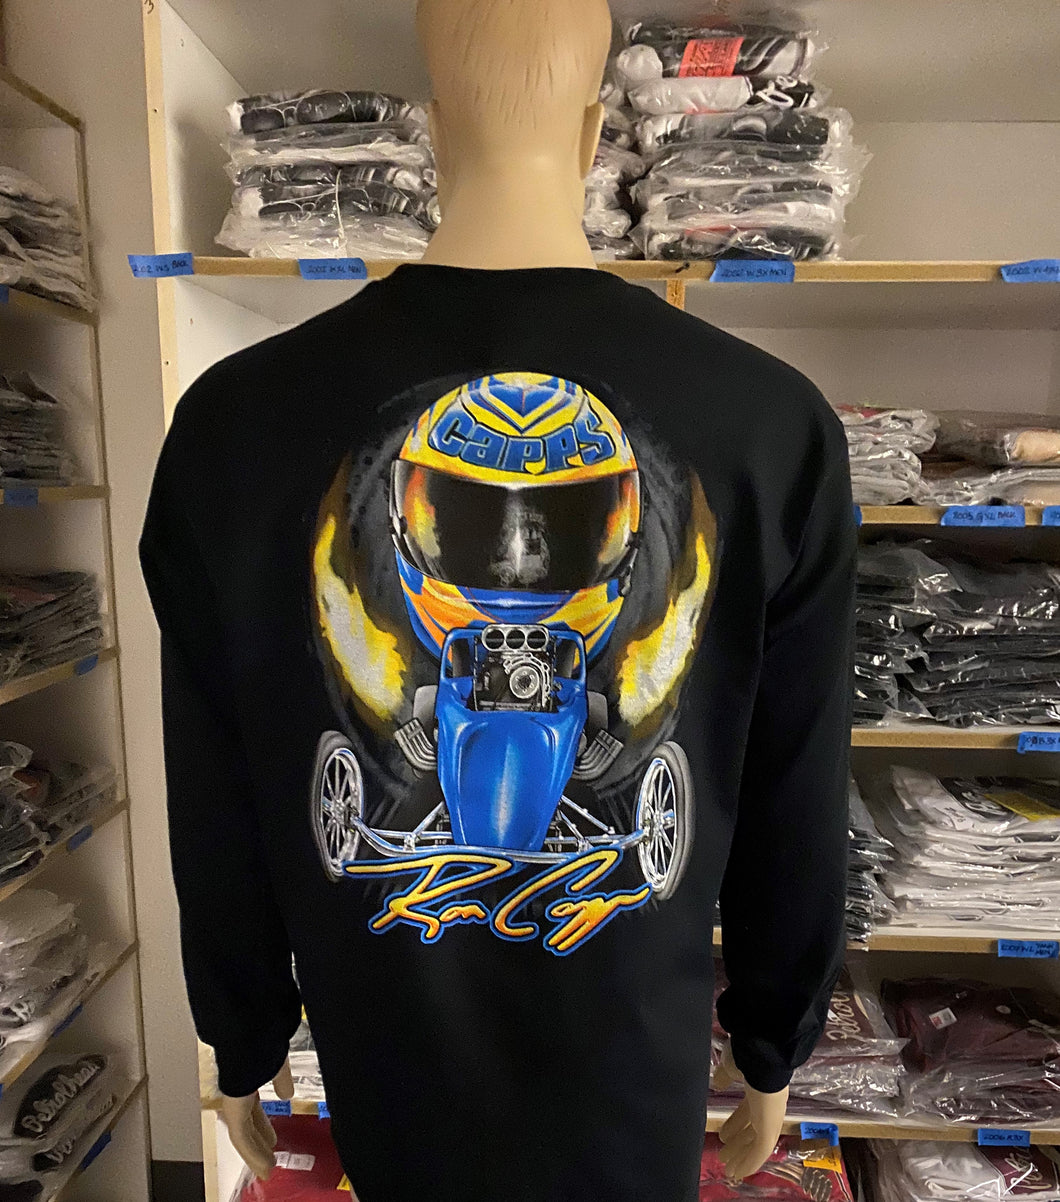 Ron Capps Fuel Altered Men's Black Long Sleeve Tee